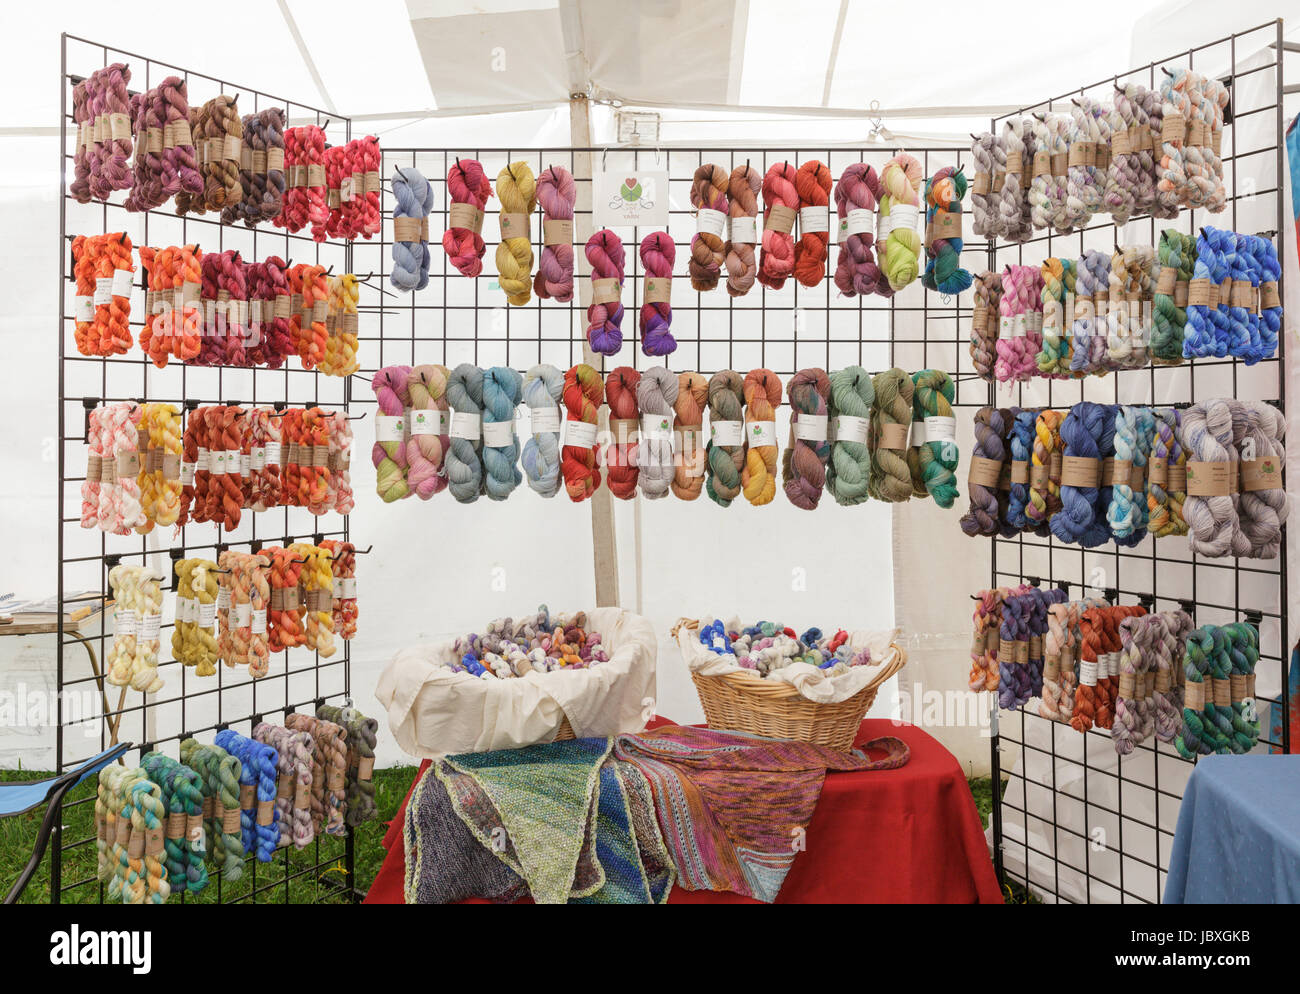 BOUCKVILLE, NY, USA - JUNE 10 2017: Many kinds of hand dyed wool skeins for sale at the annual Fiber Festival of Central New York. Stock Photo